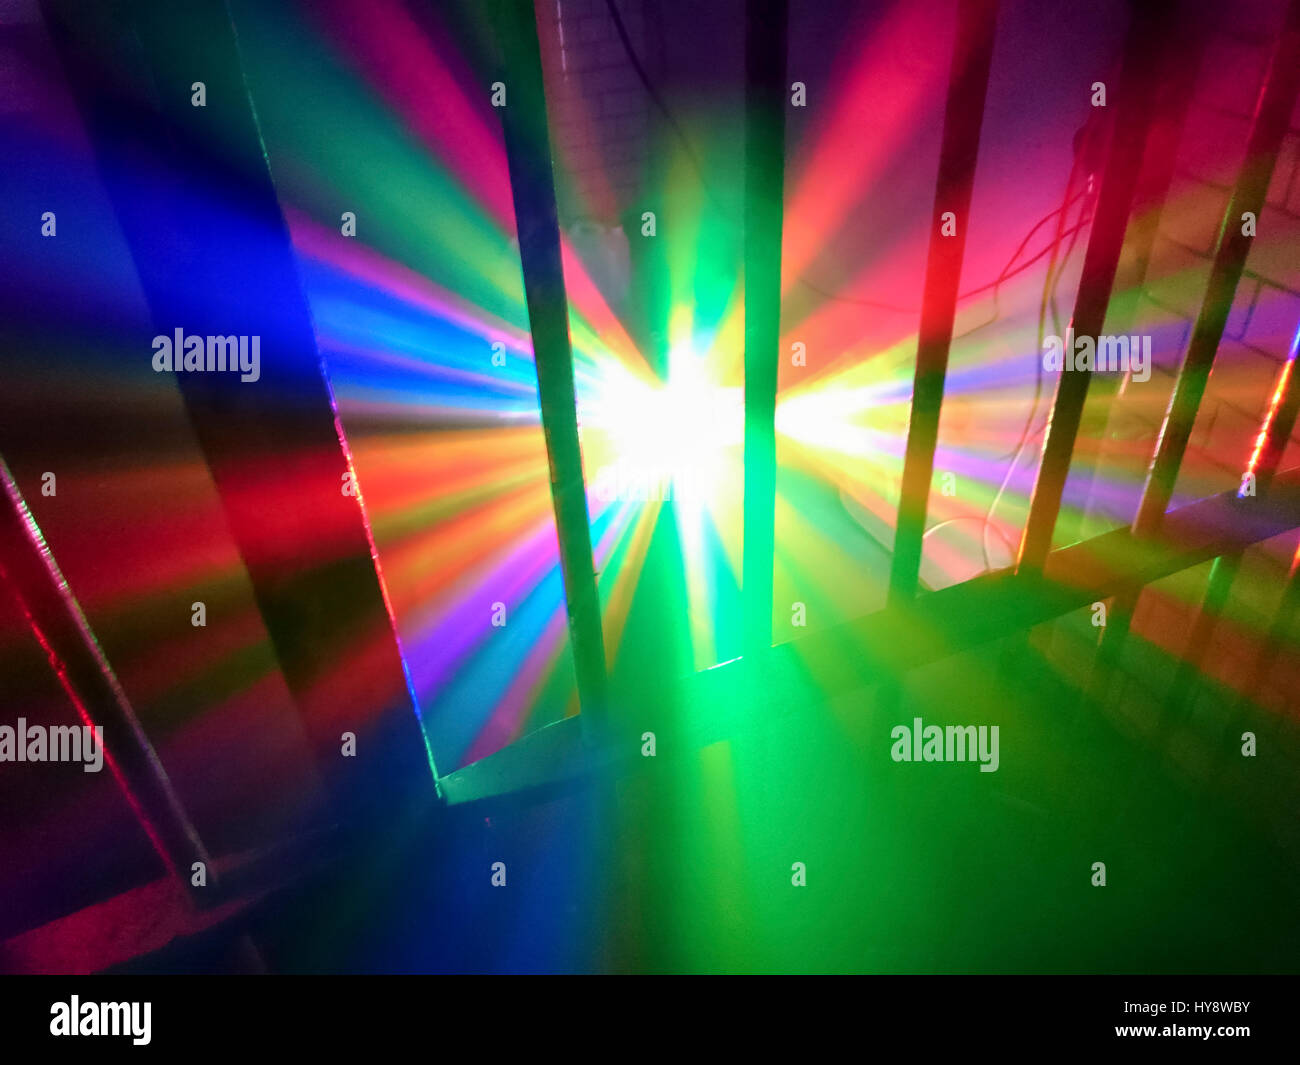 Disco lighting in a prison cell at “Fantazia meets Raindance” Rave held in a disused Crown Court building in central Bristol on 1 April 2017. Stock Photo